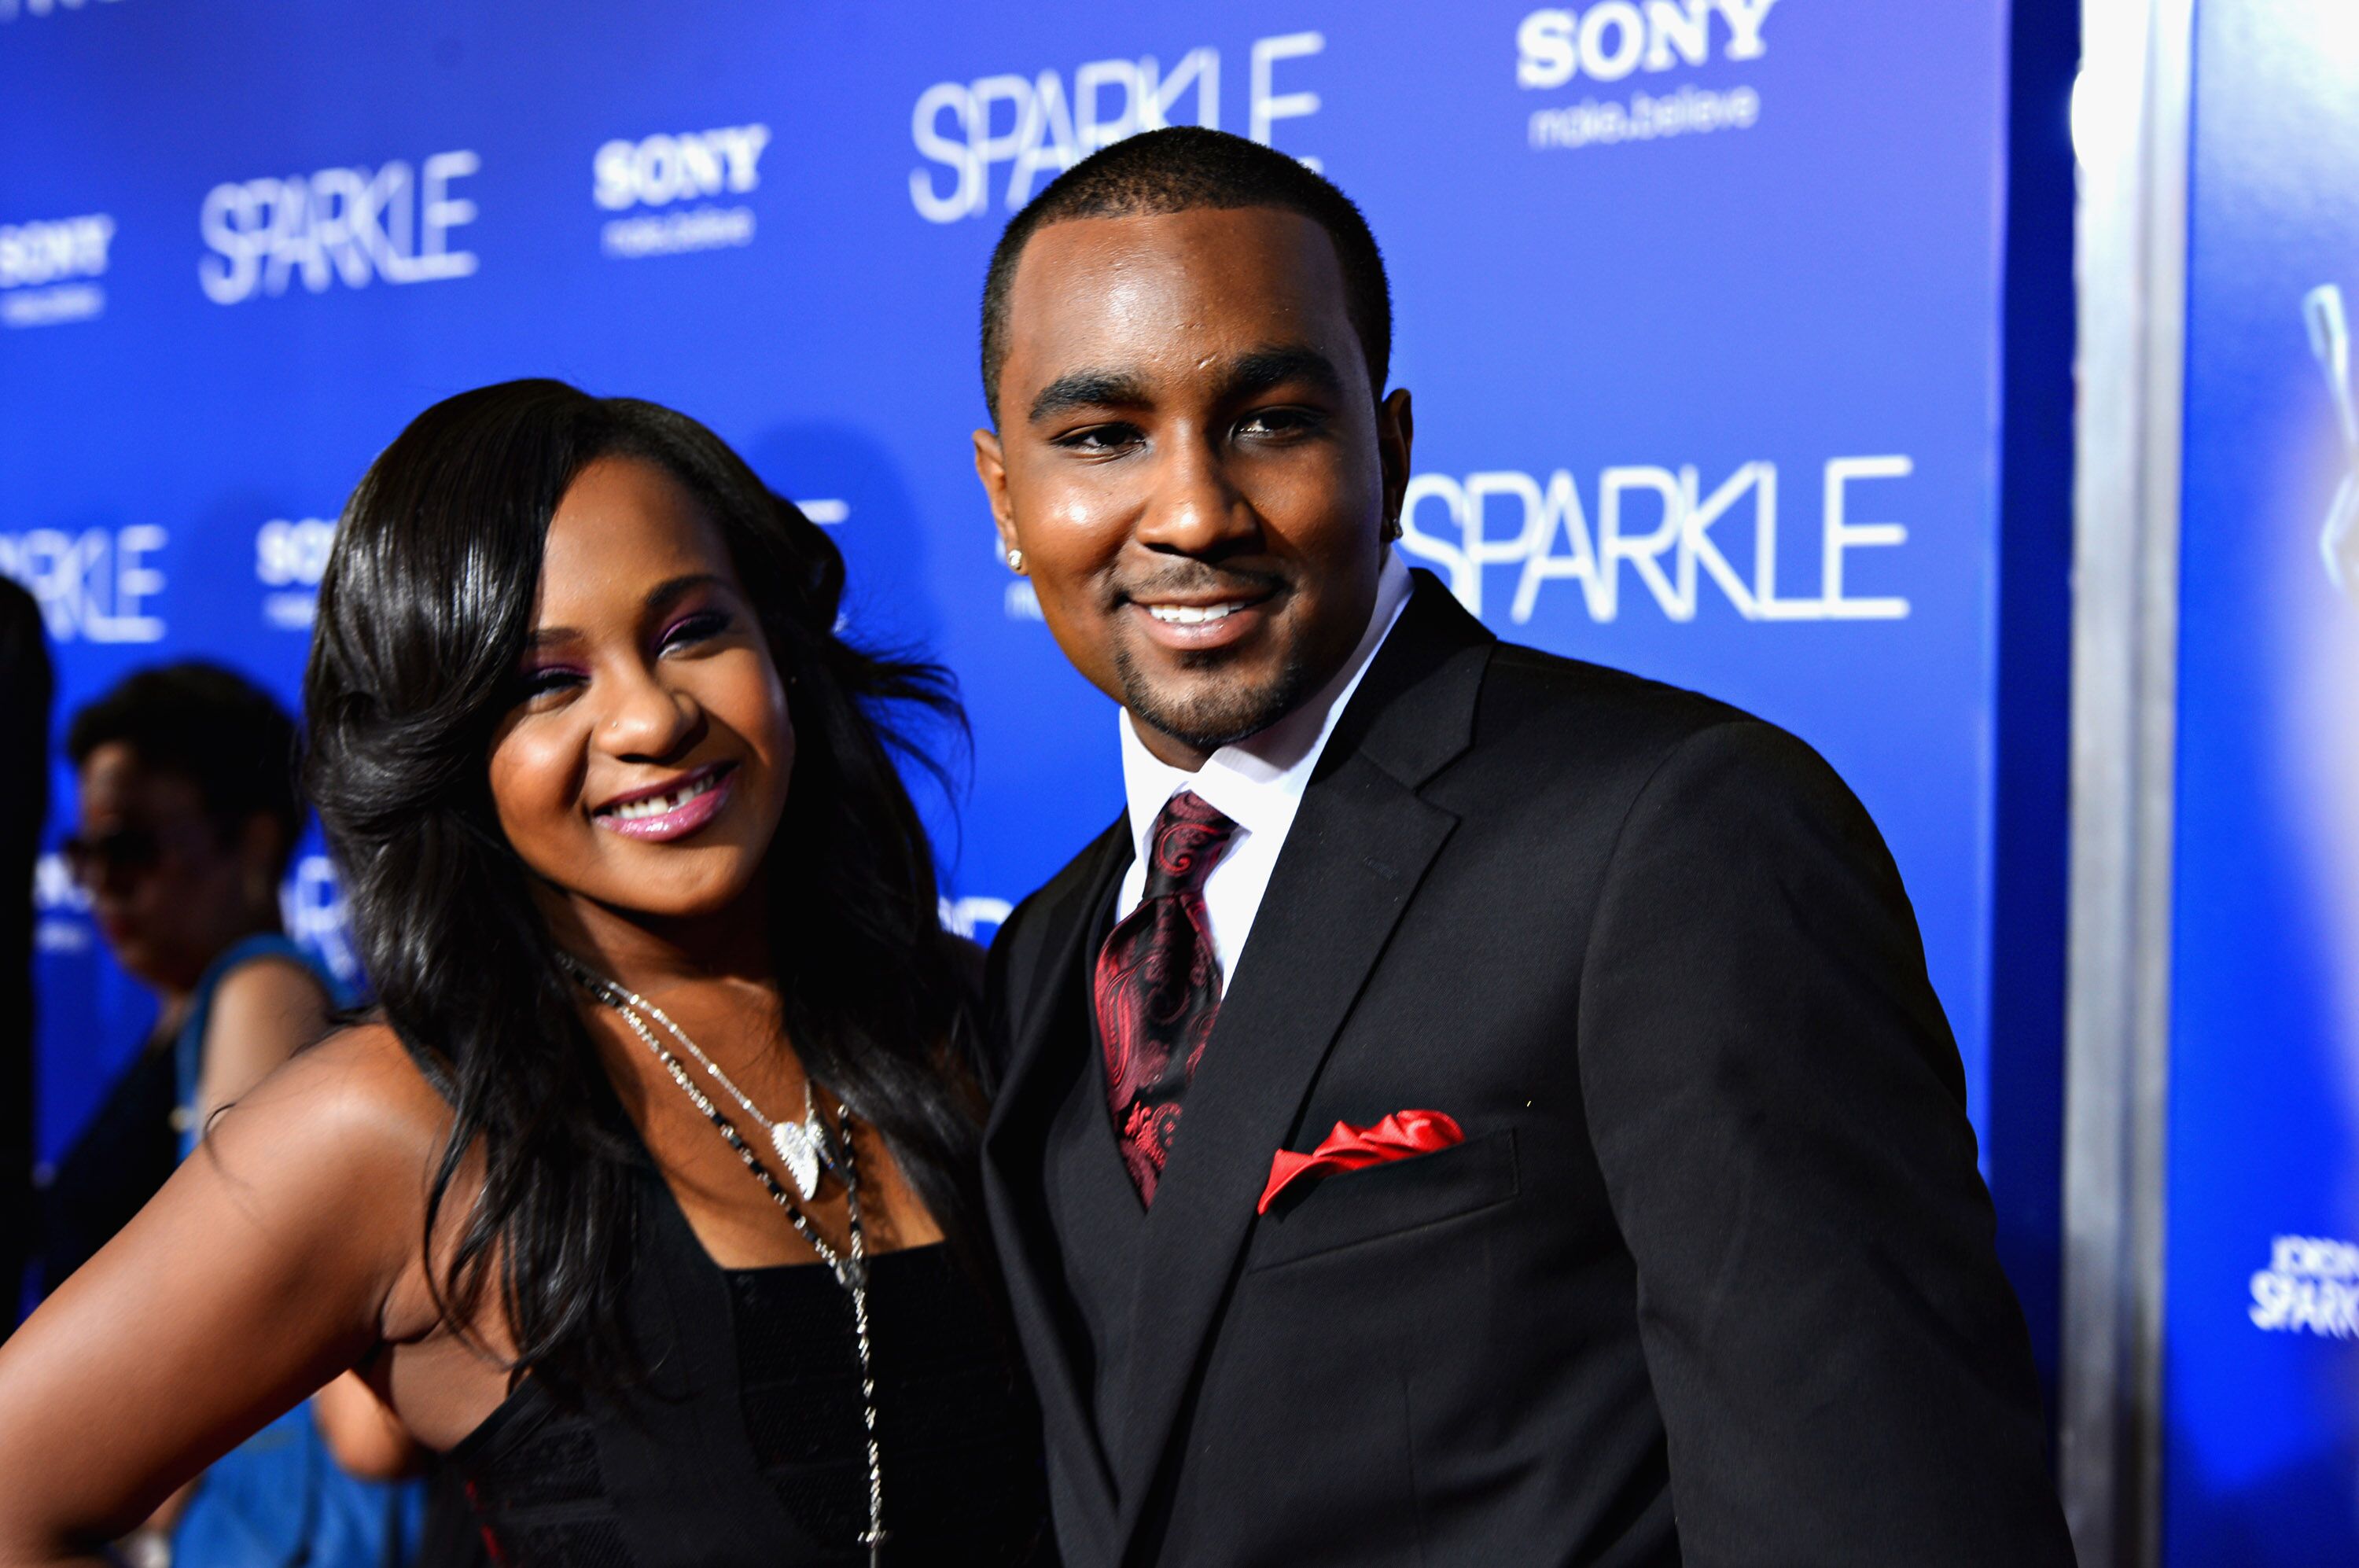 Bobbi Kristina Brown and Nick Gordon at the "Sparkle" premiere in Hollywood in 2012 | Source: Getty Images